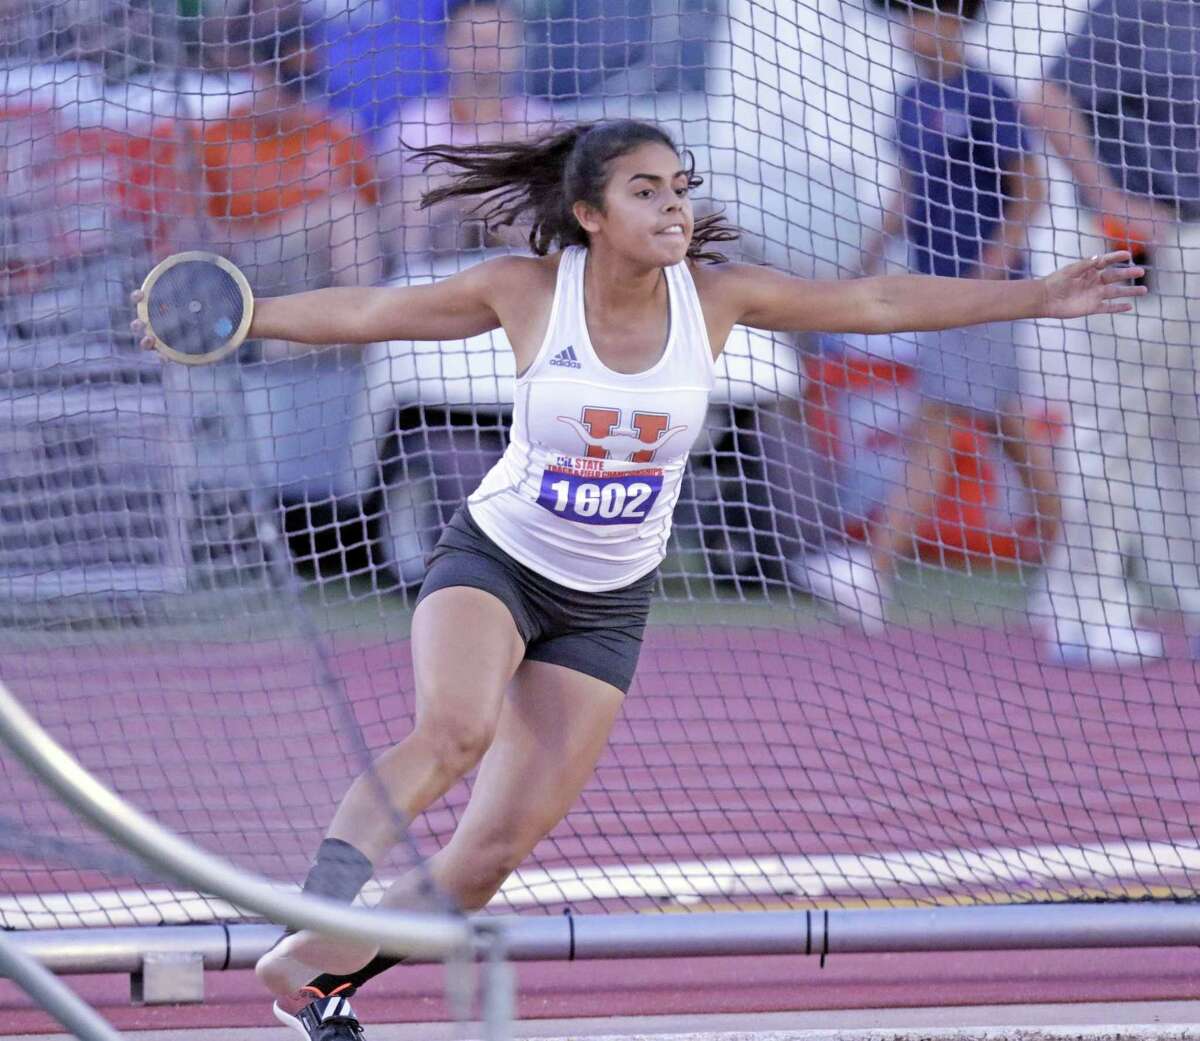 United's Sadey Rodriguez finished third place in the discus at the 2018 Track & Field State Championships at the University of Texas in Austin on Saturday evening.